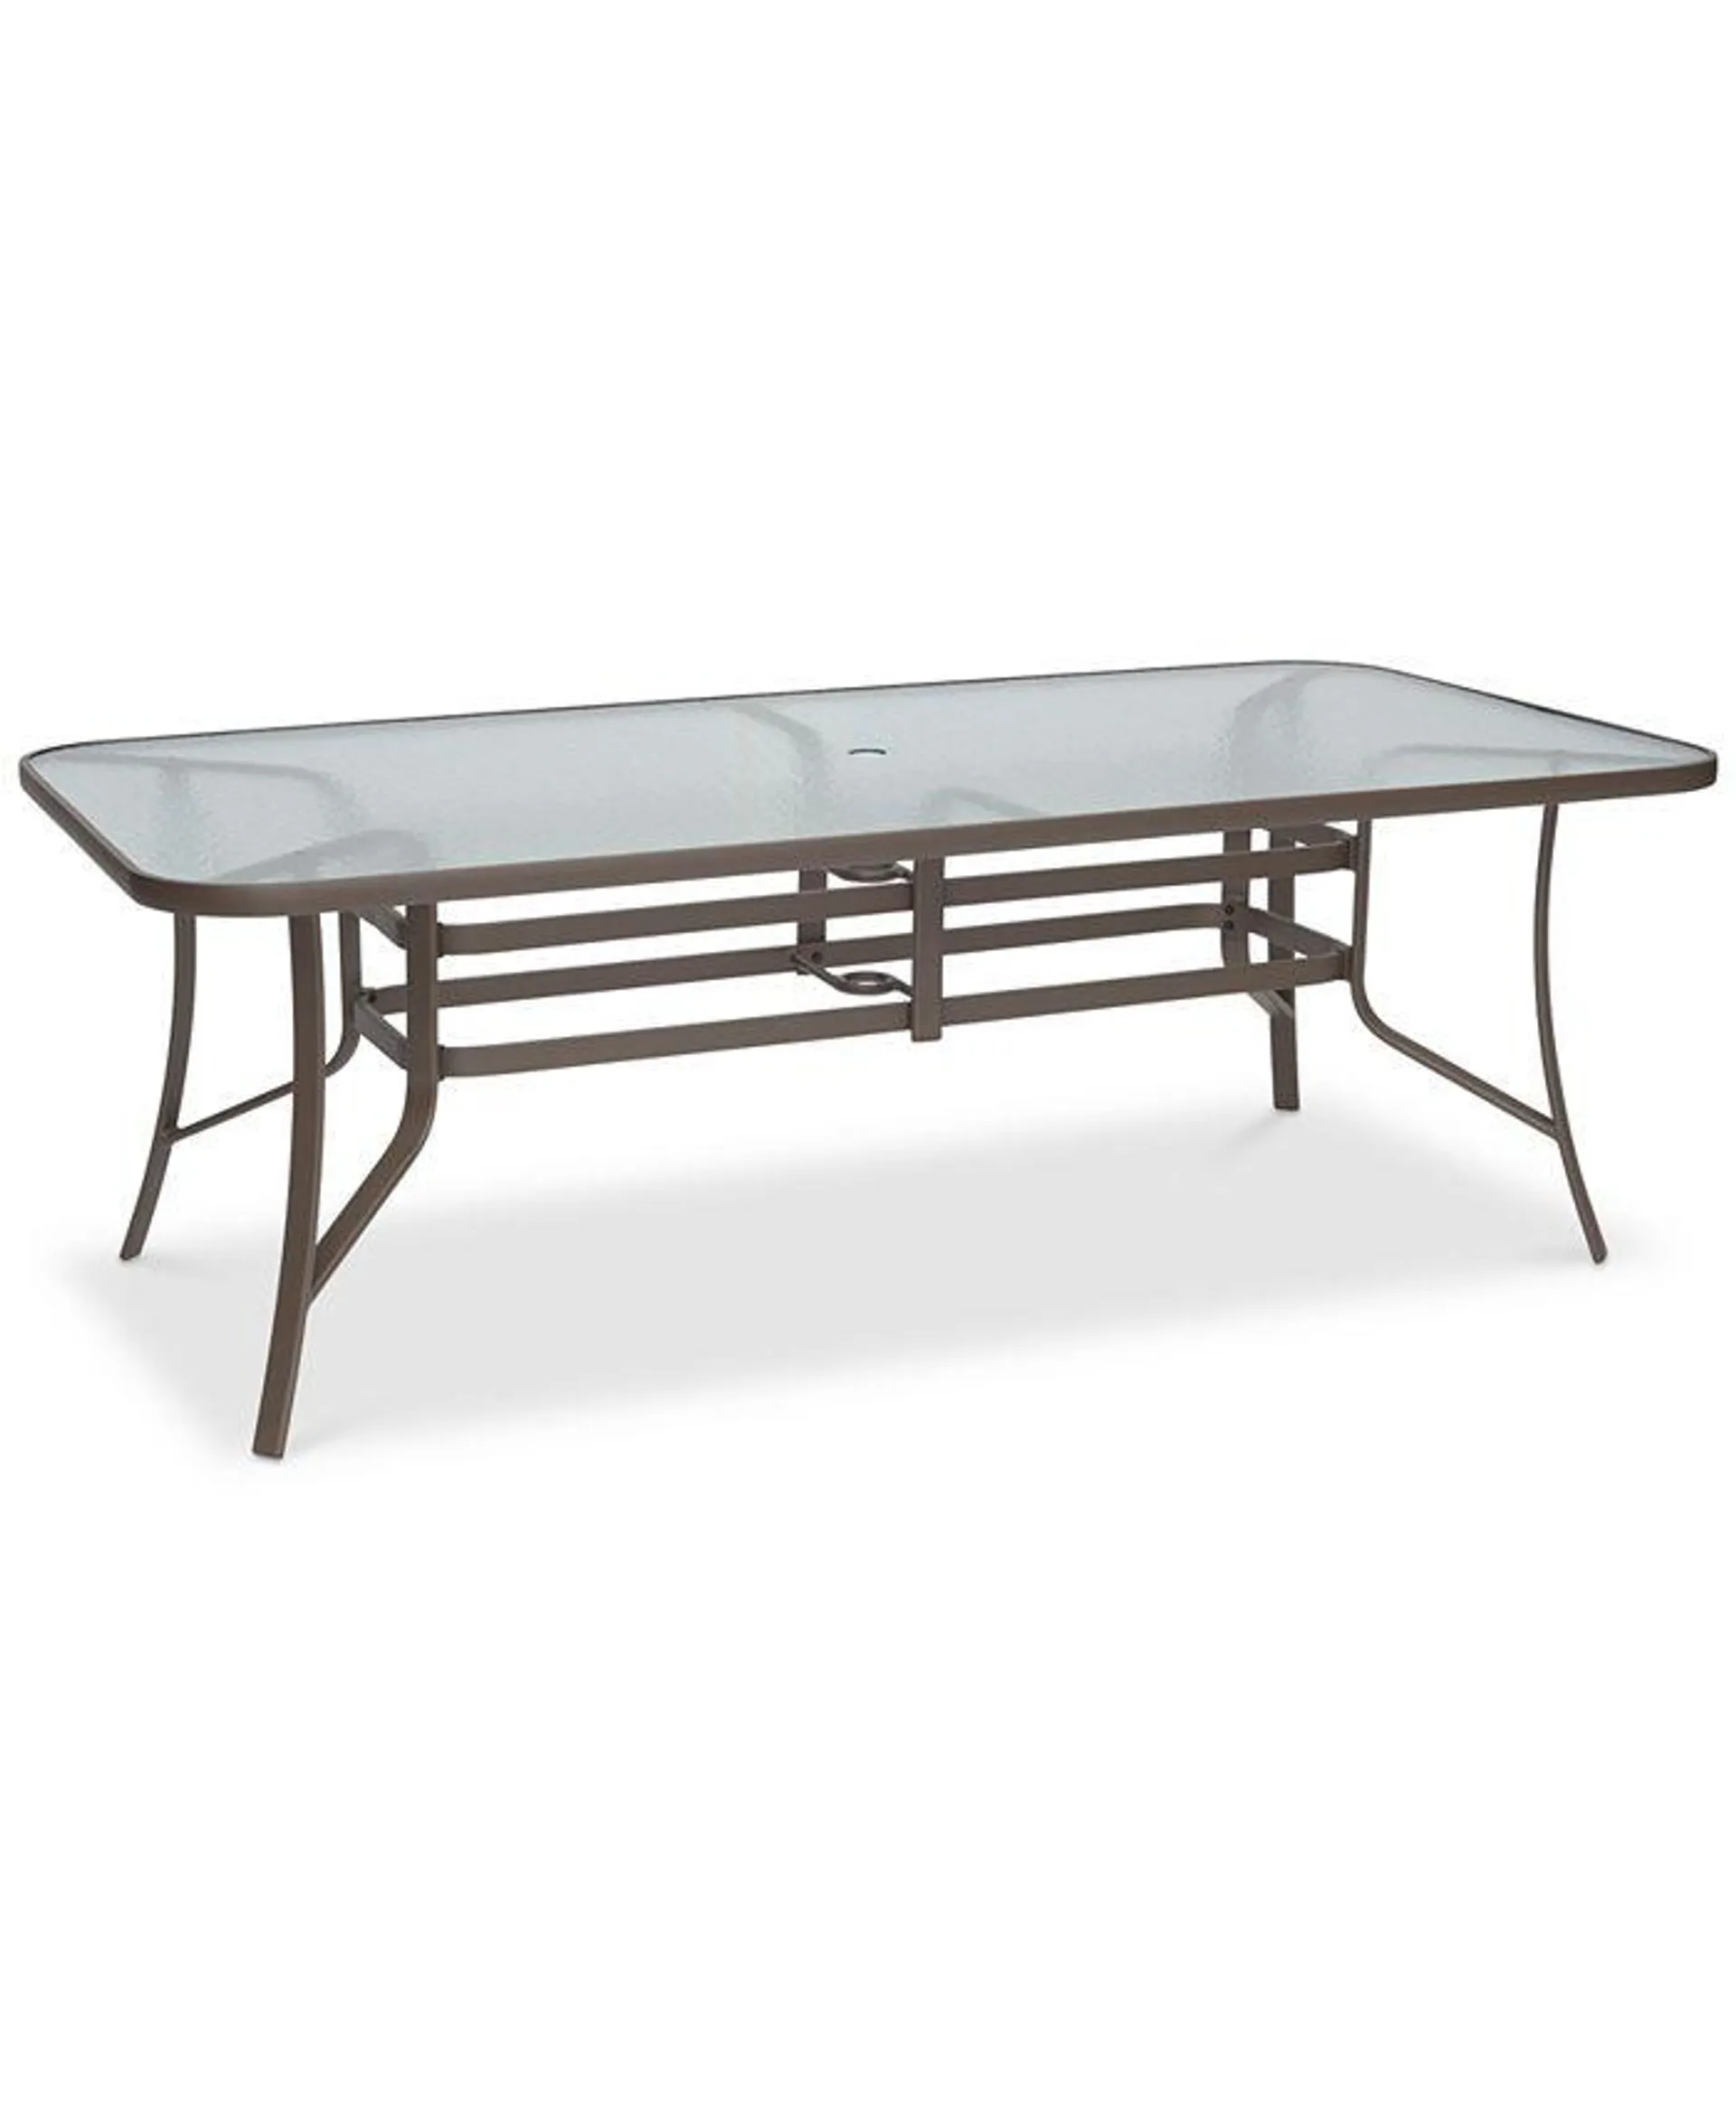 Oasis Aluminum Outdoor 84" x 42" Dining Table, Created for Macy's